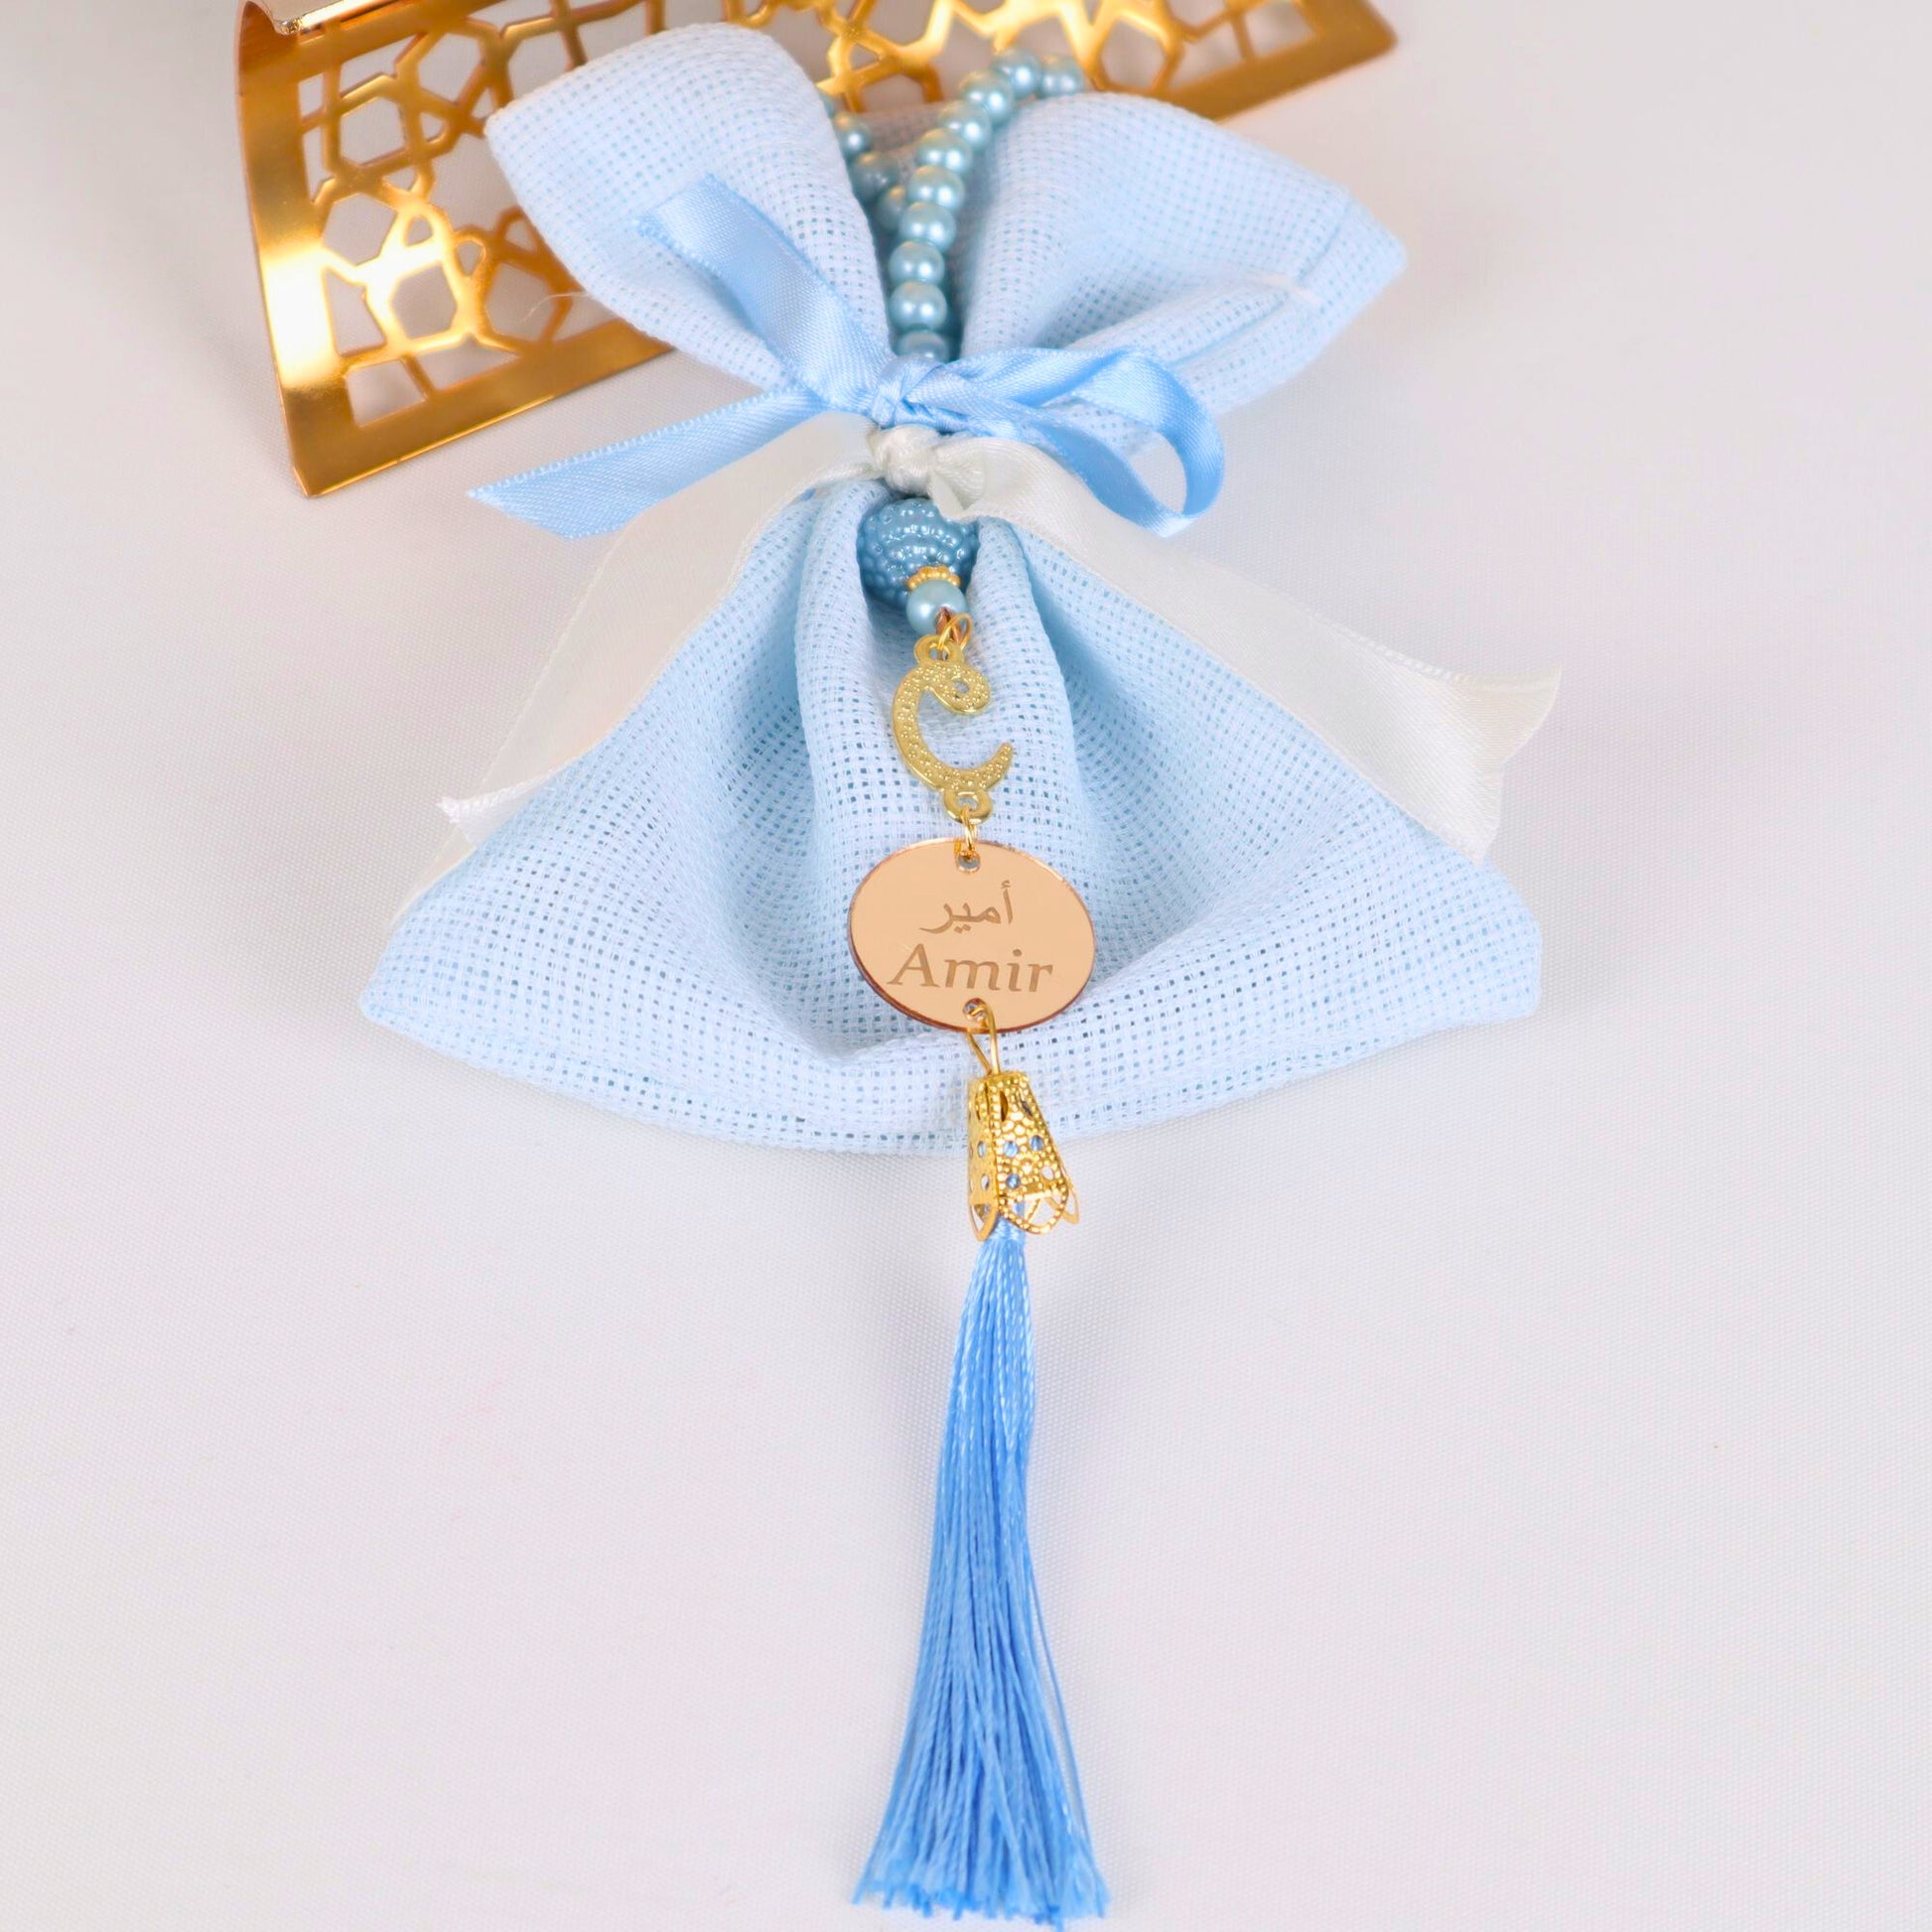 Personalized Pearl Prayer Beads in Colorful Pouch Favors for Guests - Islamic Elite Favors is a handmade gift shop offering a wide variety of unique and personalized gifts for all occasions. Whether you're looking for the perfect Ramadan, Eid, Hajj, wedding gift or something special for a birthday, baby shower or anniversary, we have something for everyone. High quality, made with love.